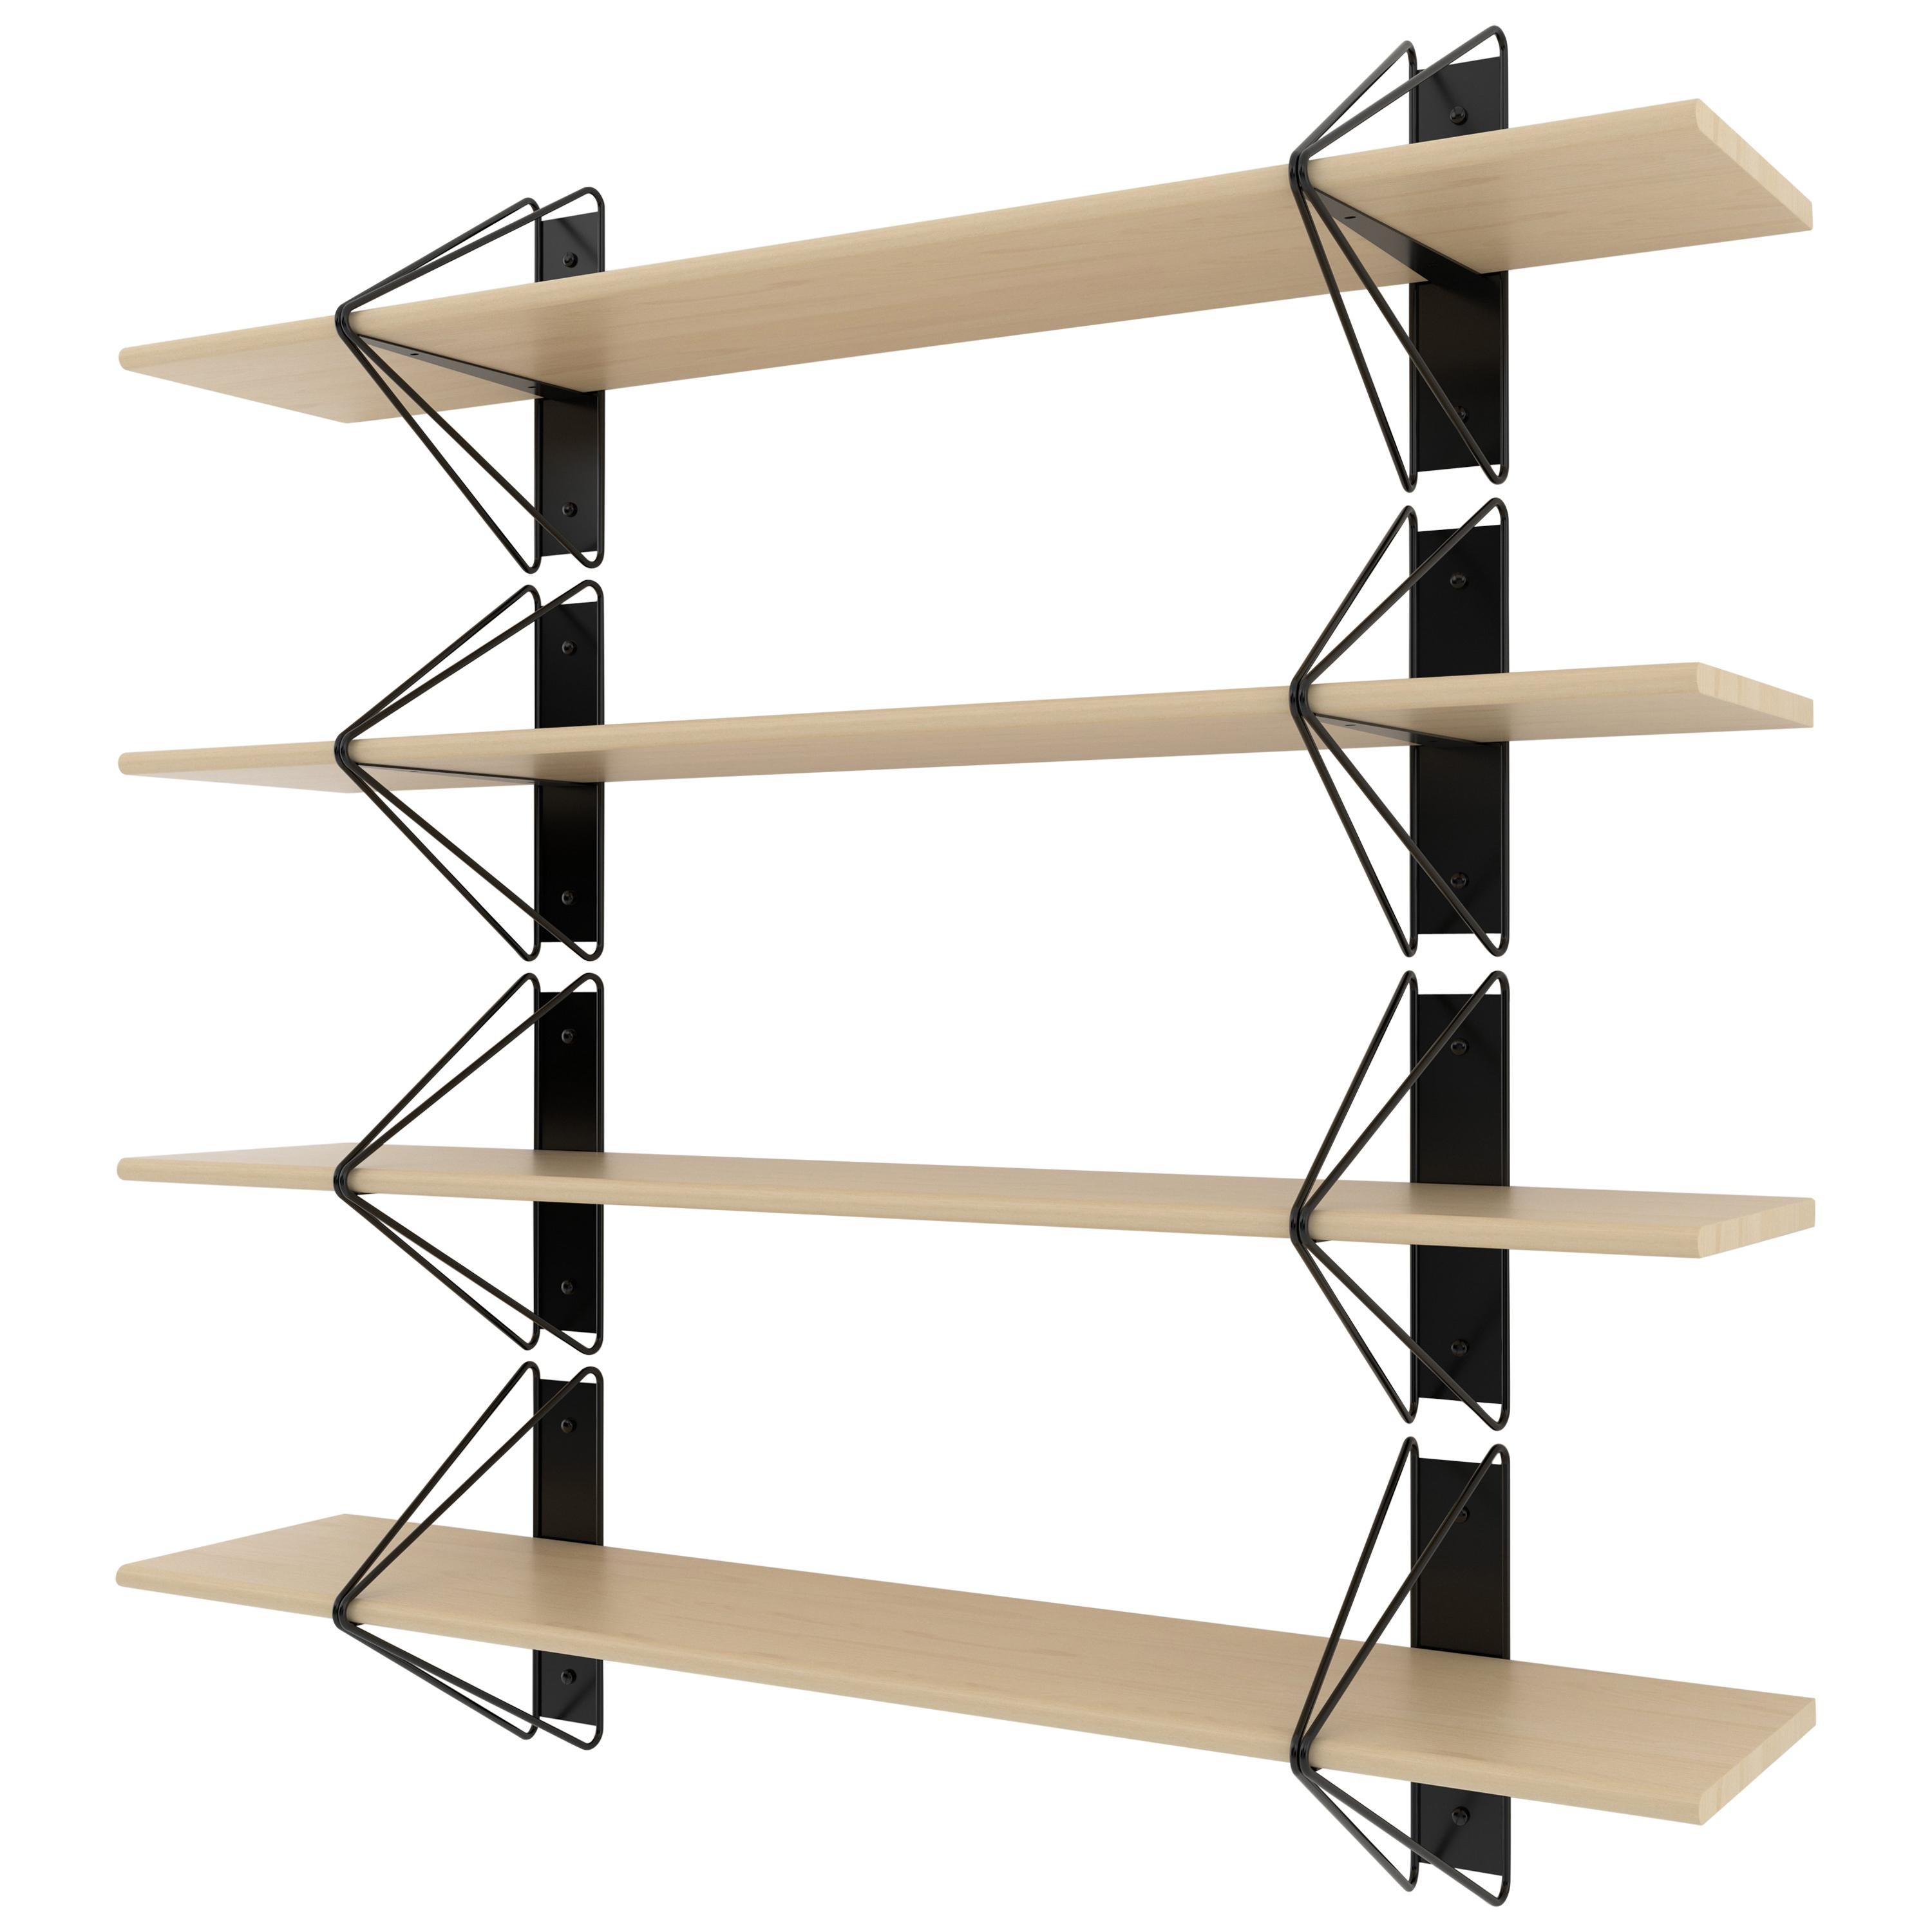 American Set of 2 Strut Shelves from Souda, Black and Maple, Made to Order For Sale